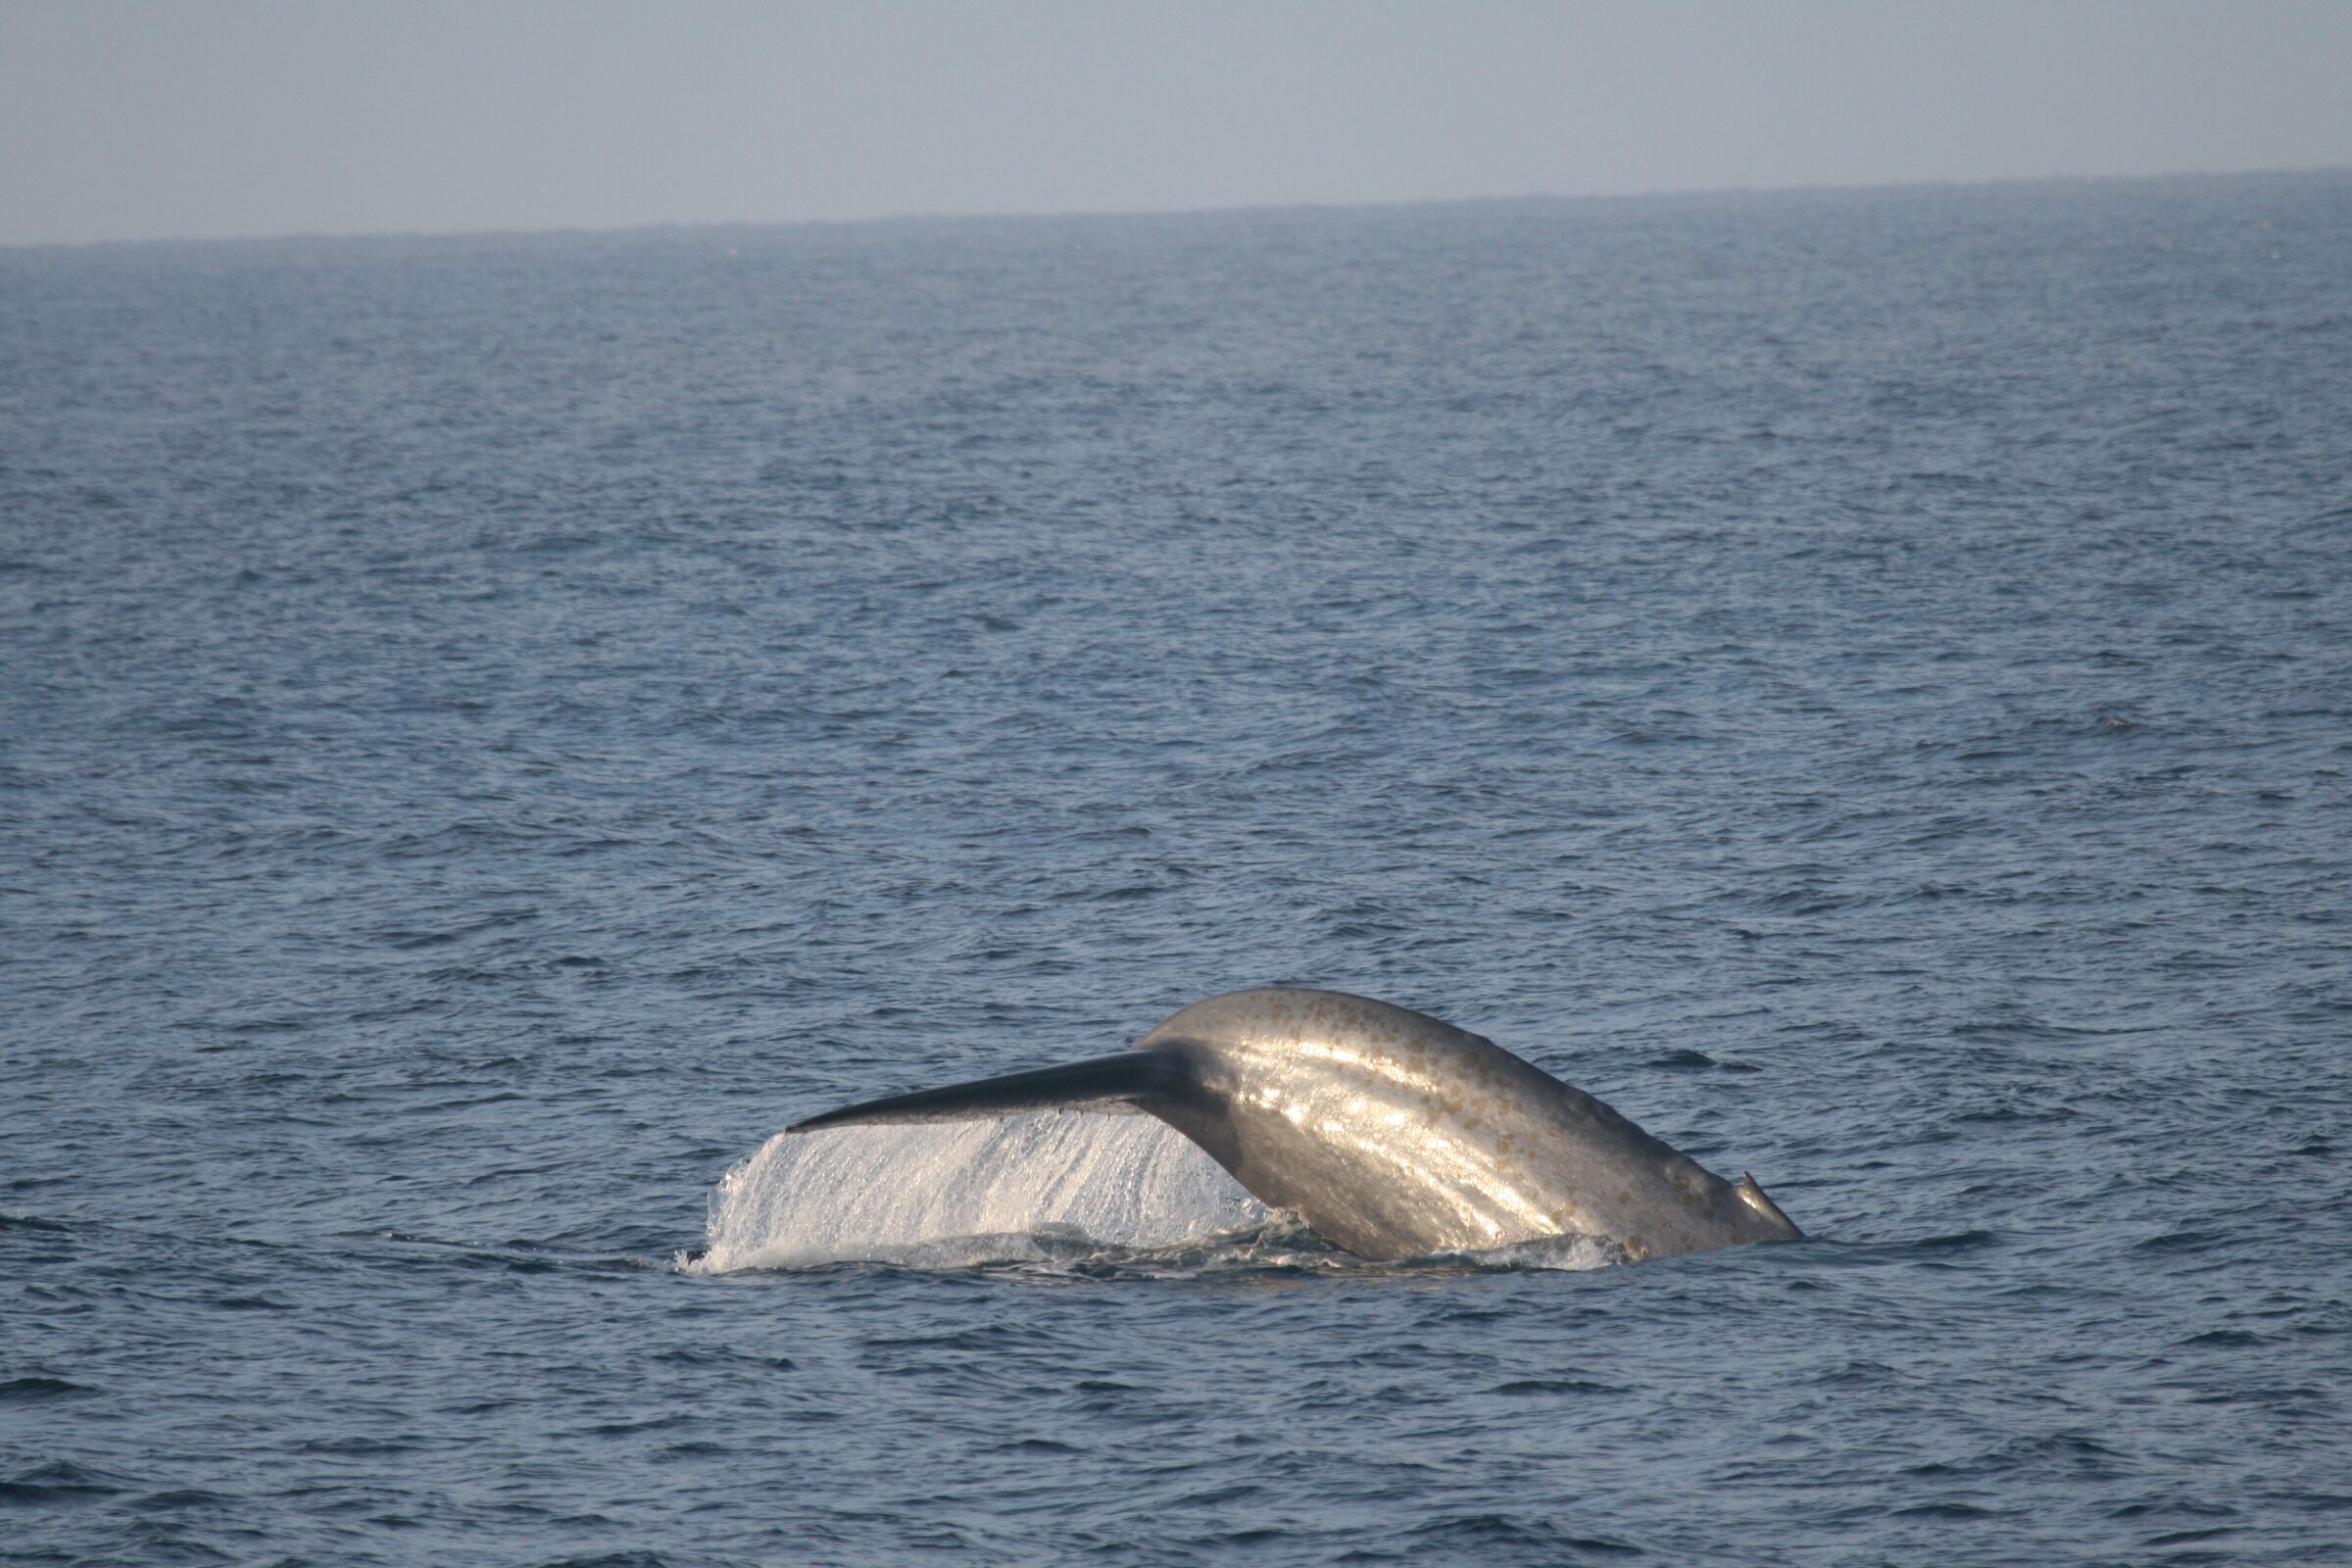 A blue whale off the coast of San Diego was seen fluking up out of the water before diving beneath the surface again.